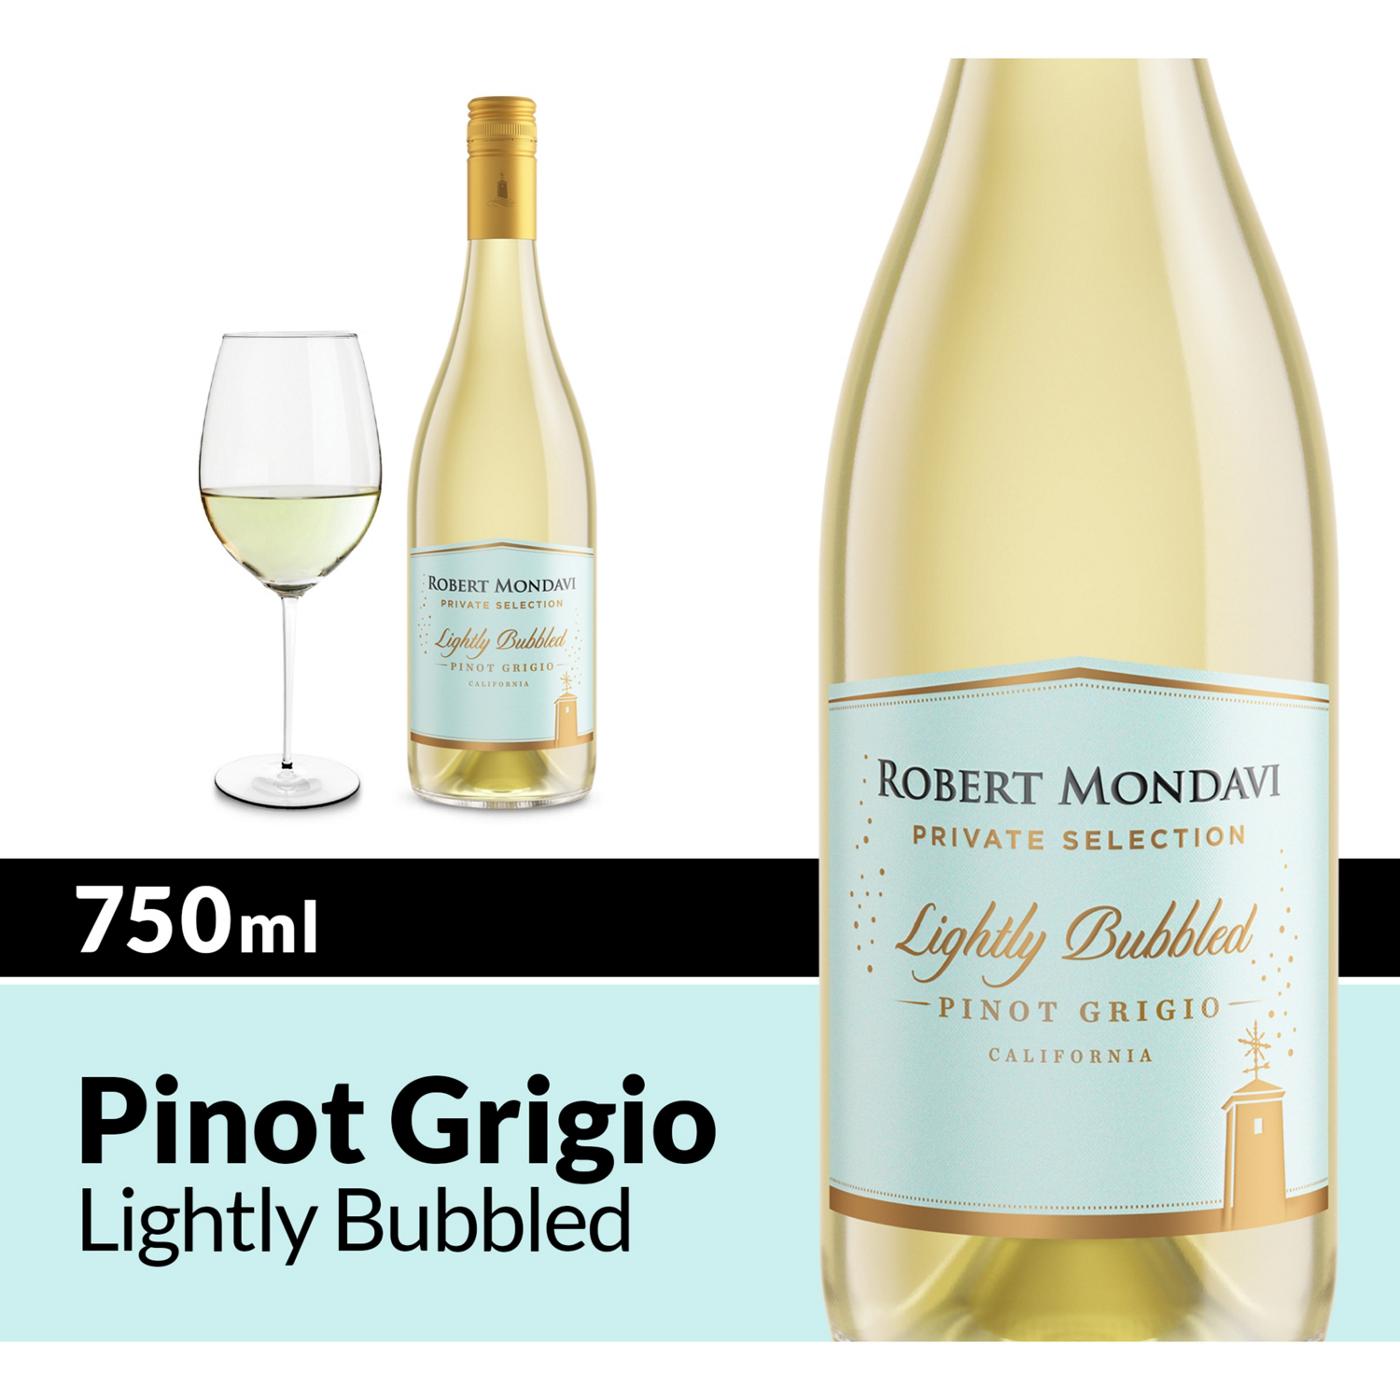 Robert Mondavi Private Selection Selection Lightly Bubbled Pinot Grigio White Wine 750 mL Bottle; image 6 of 11